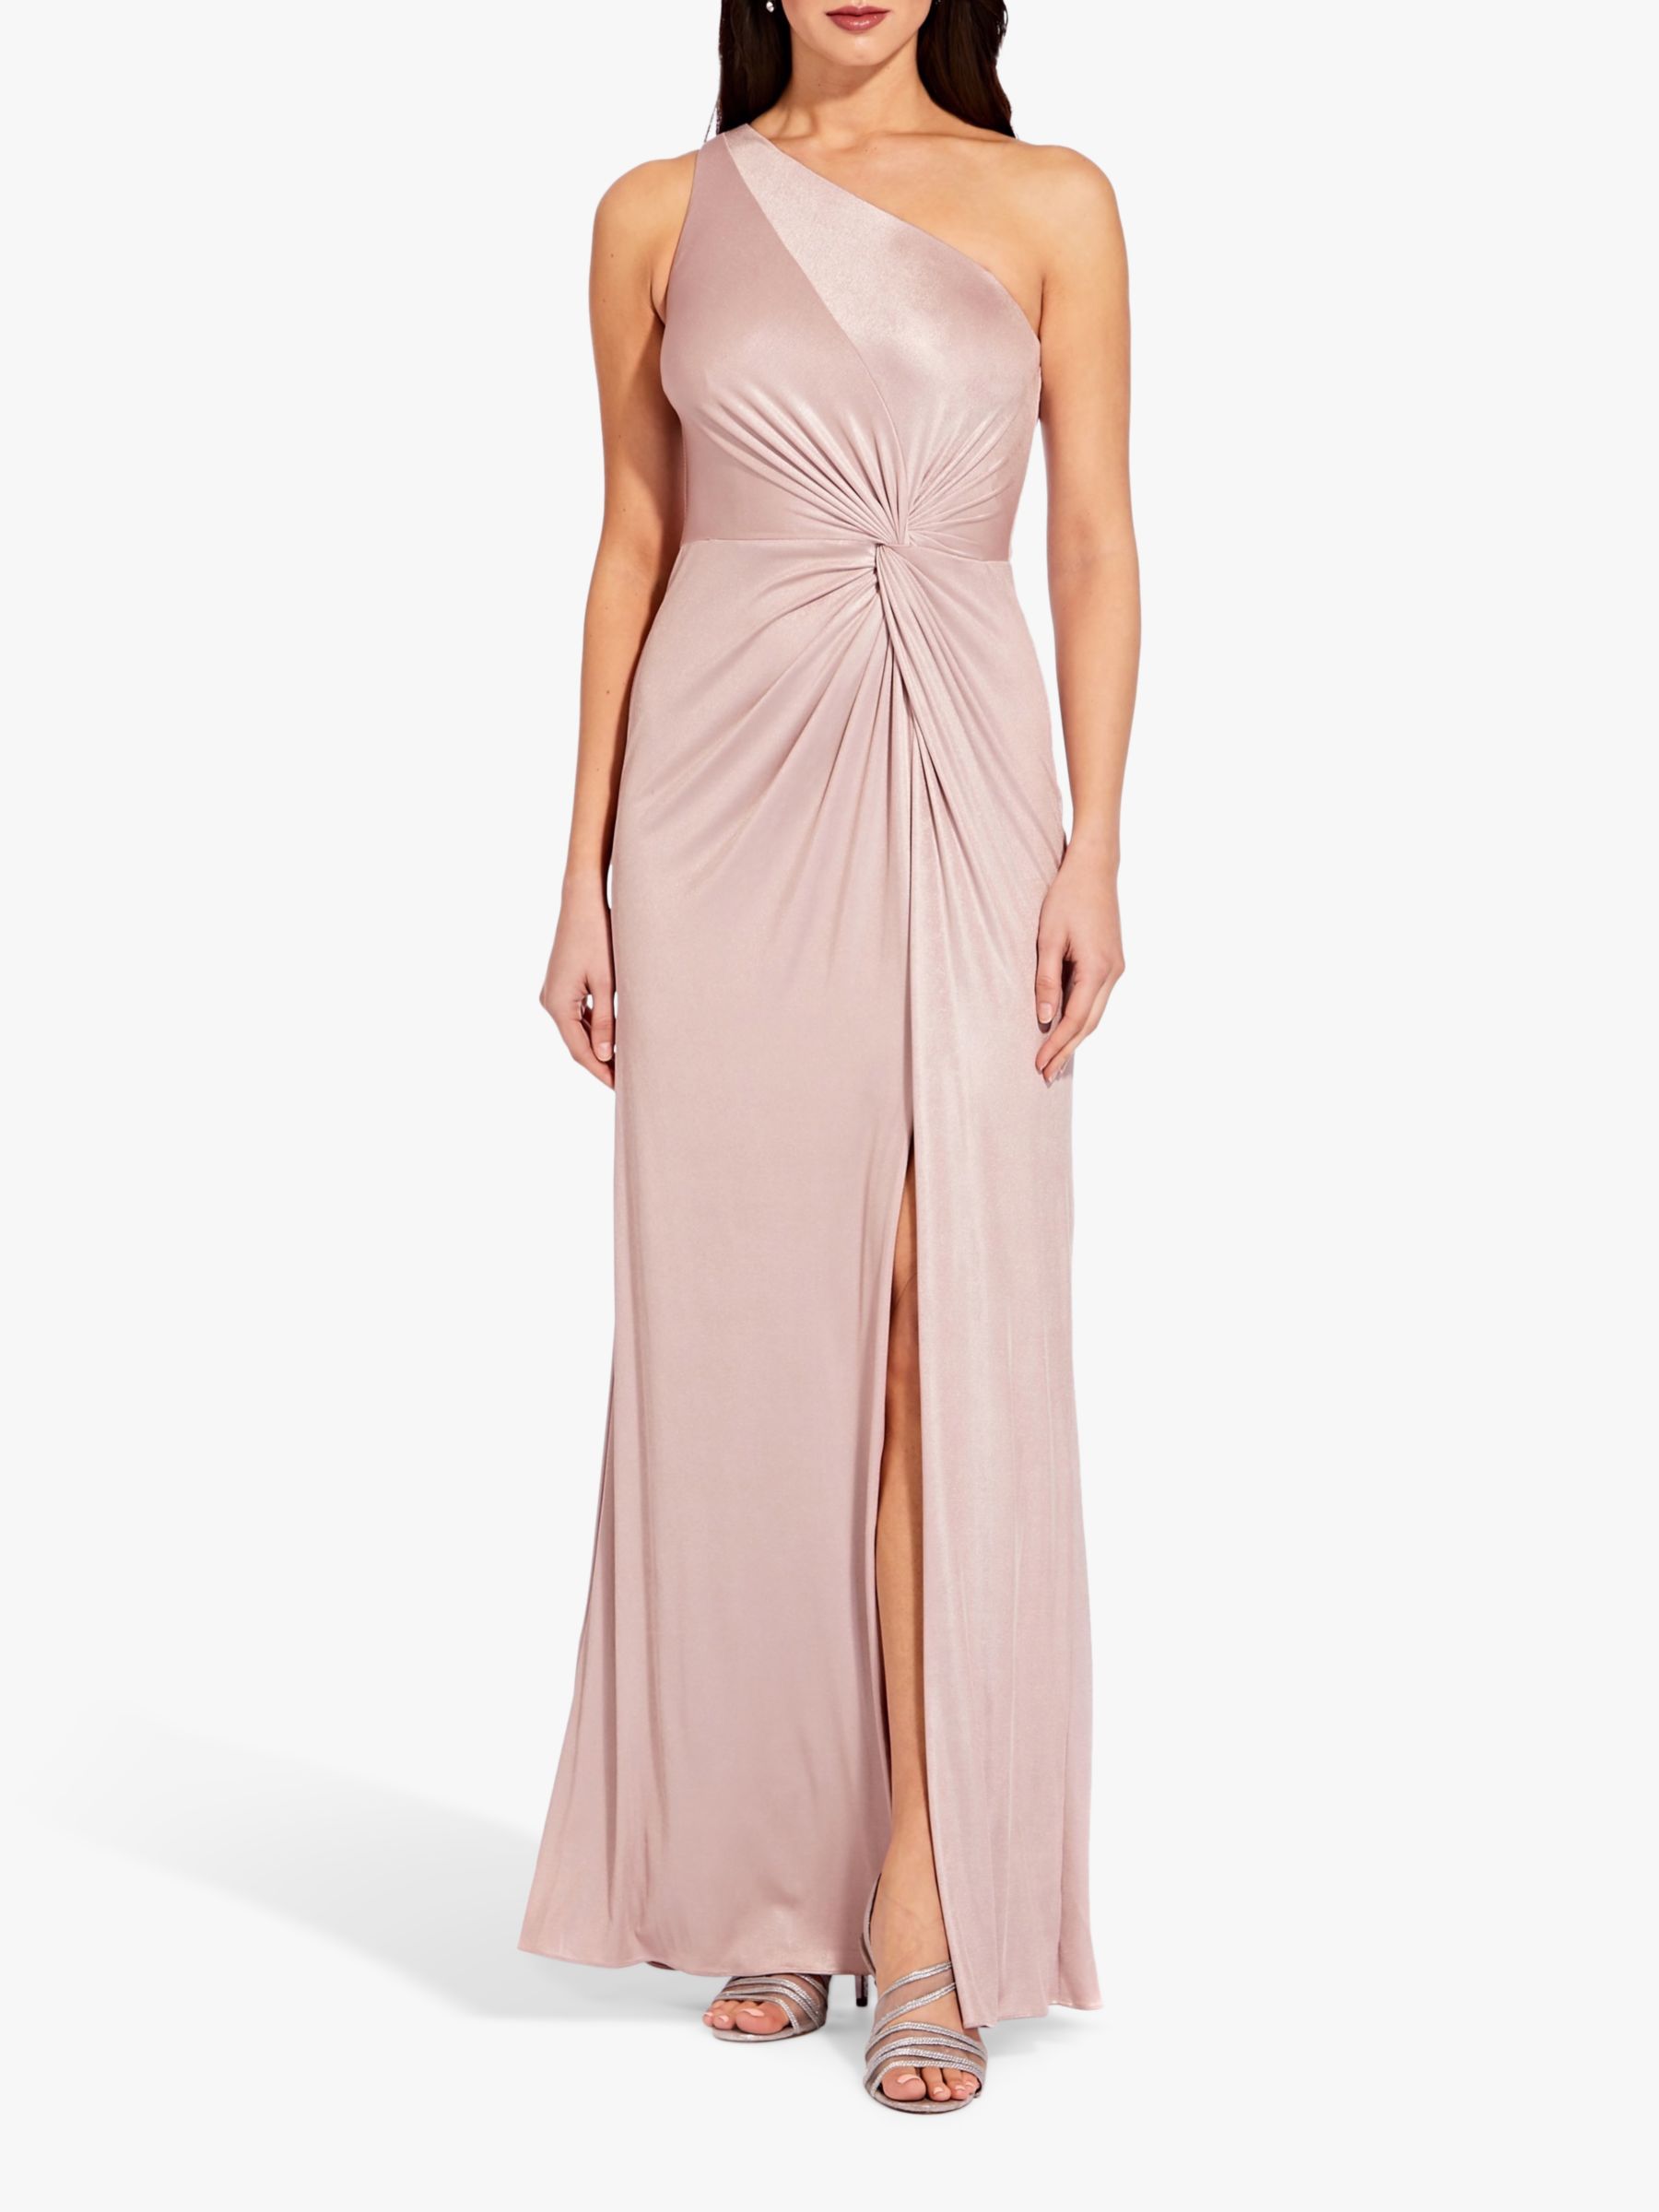 Adrianna Papell Foil Long Jersey Dress, Dusted Petal